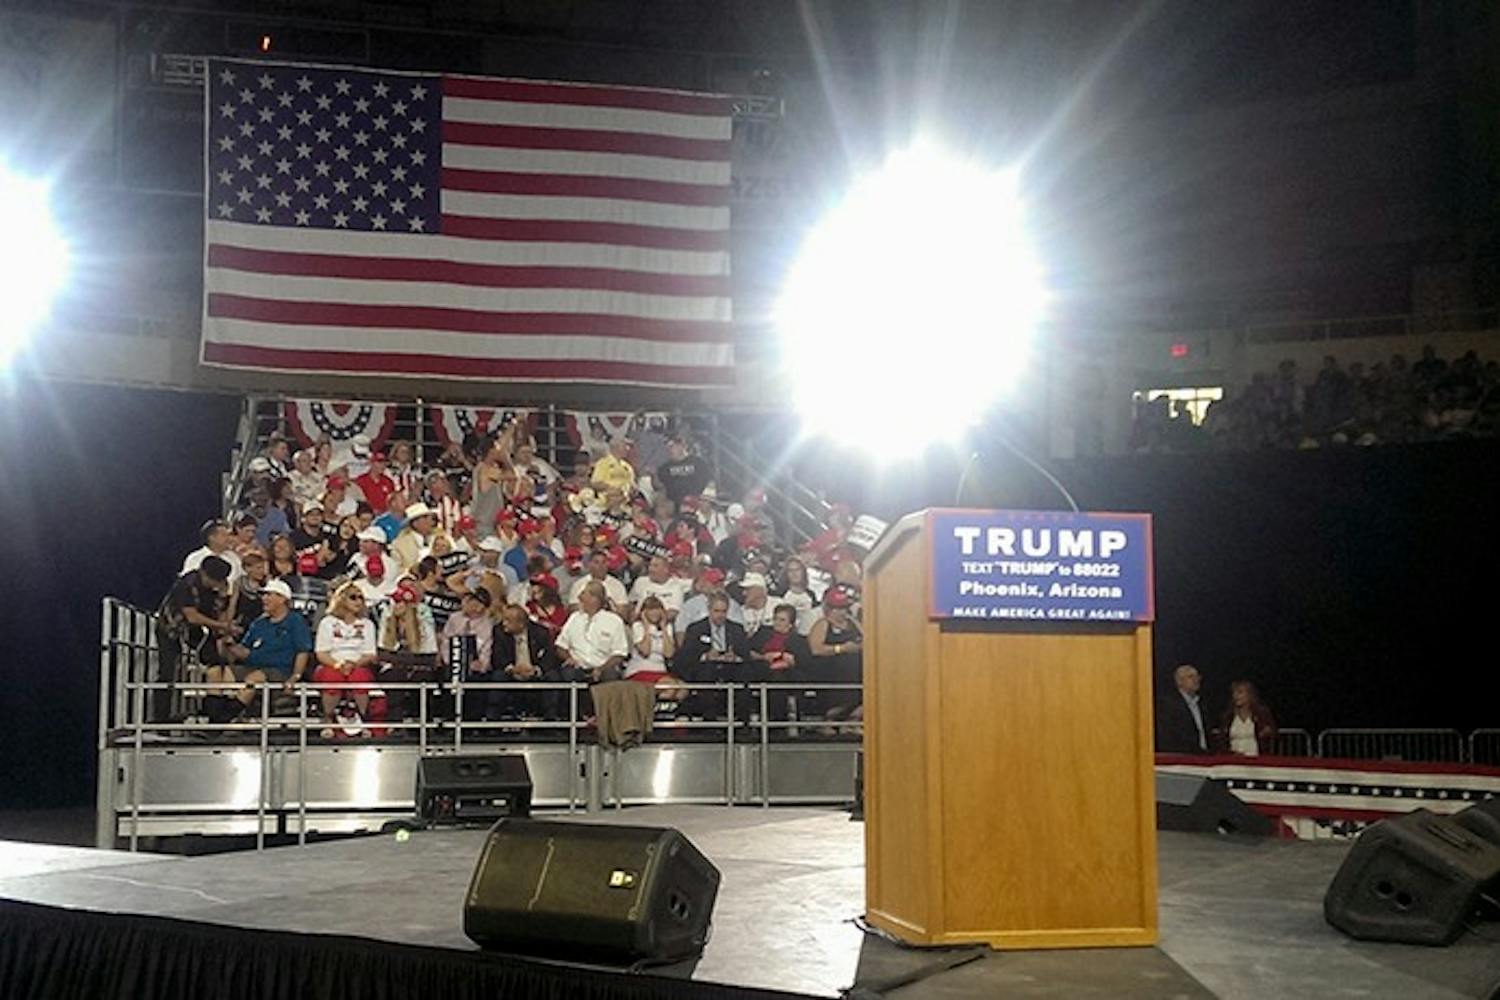 Presumptive GOP nominee Donald Trump took the stage at the&nbsp;Arizona Veterans Memorial Coliseum on Saturday, June 18 to address supporters at his fourth Arizona campaign rally.&nbsp;